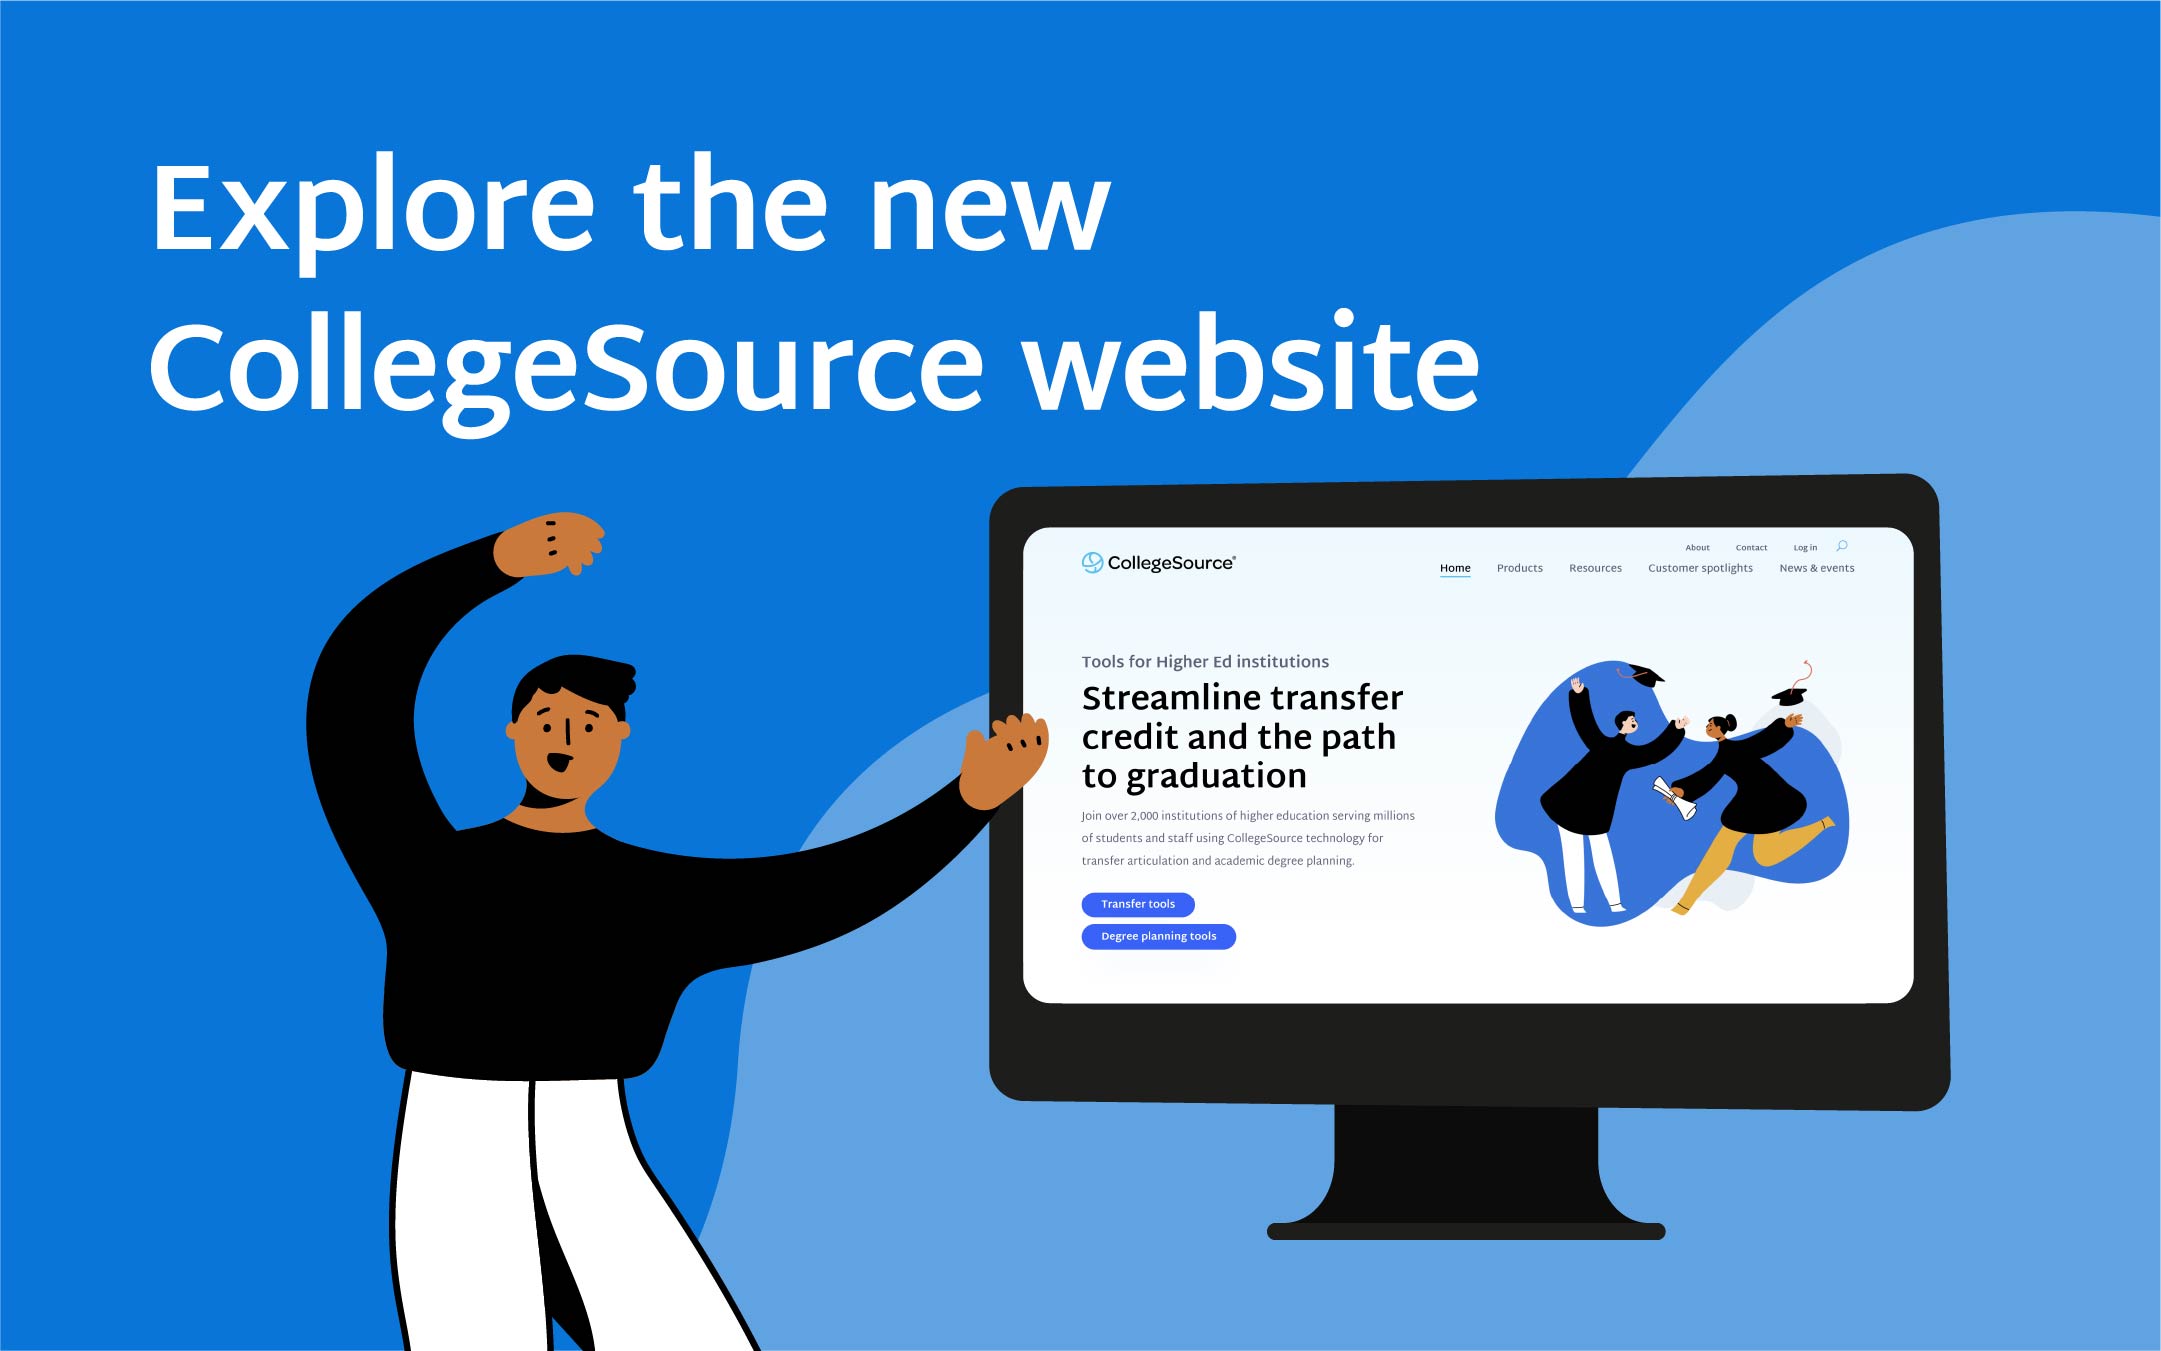 Explore-the-new-collegesource-website-redesign